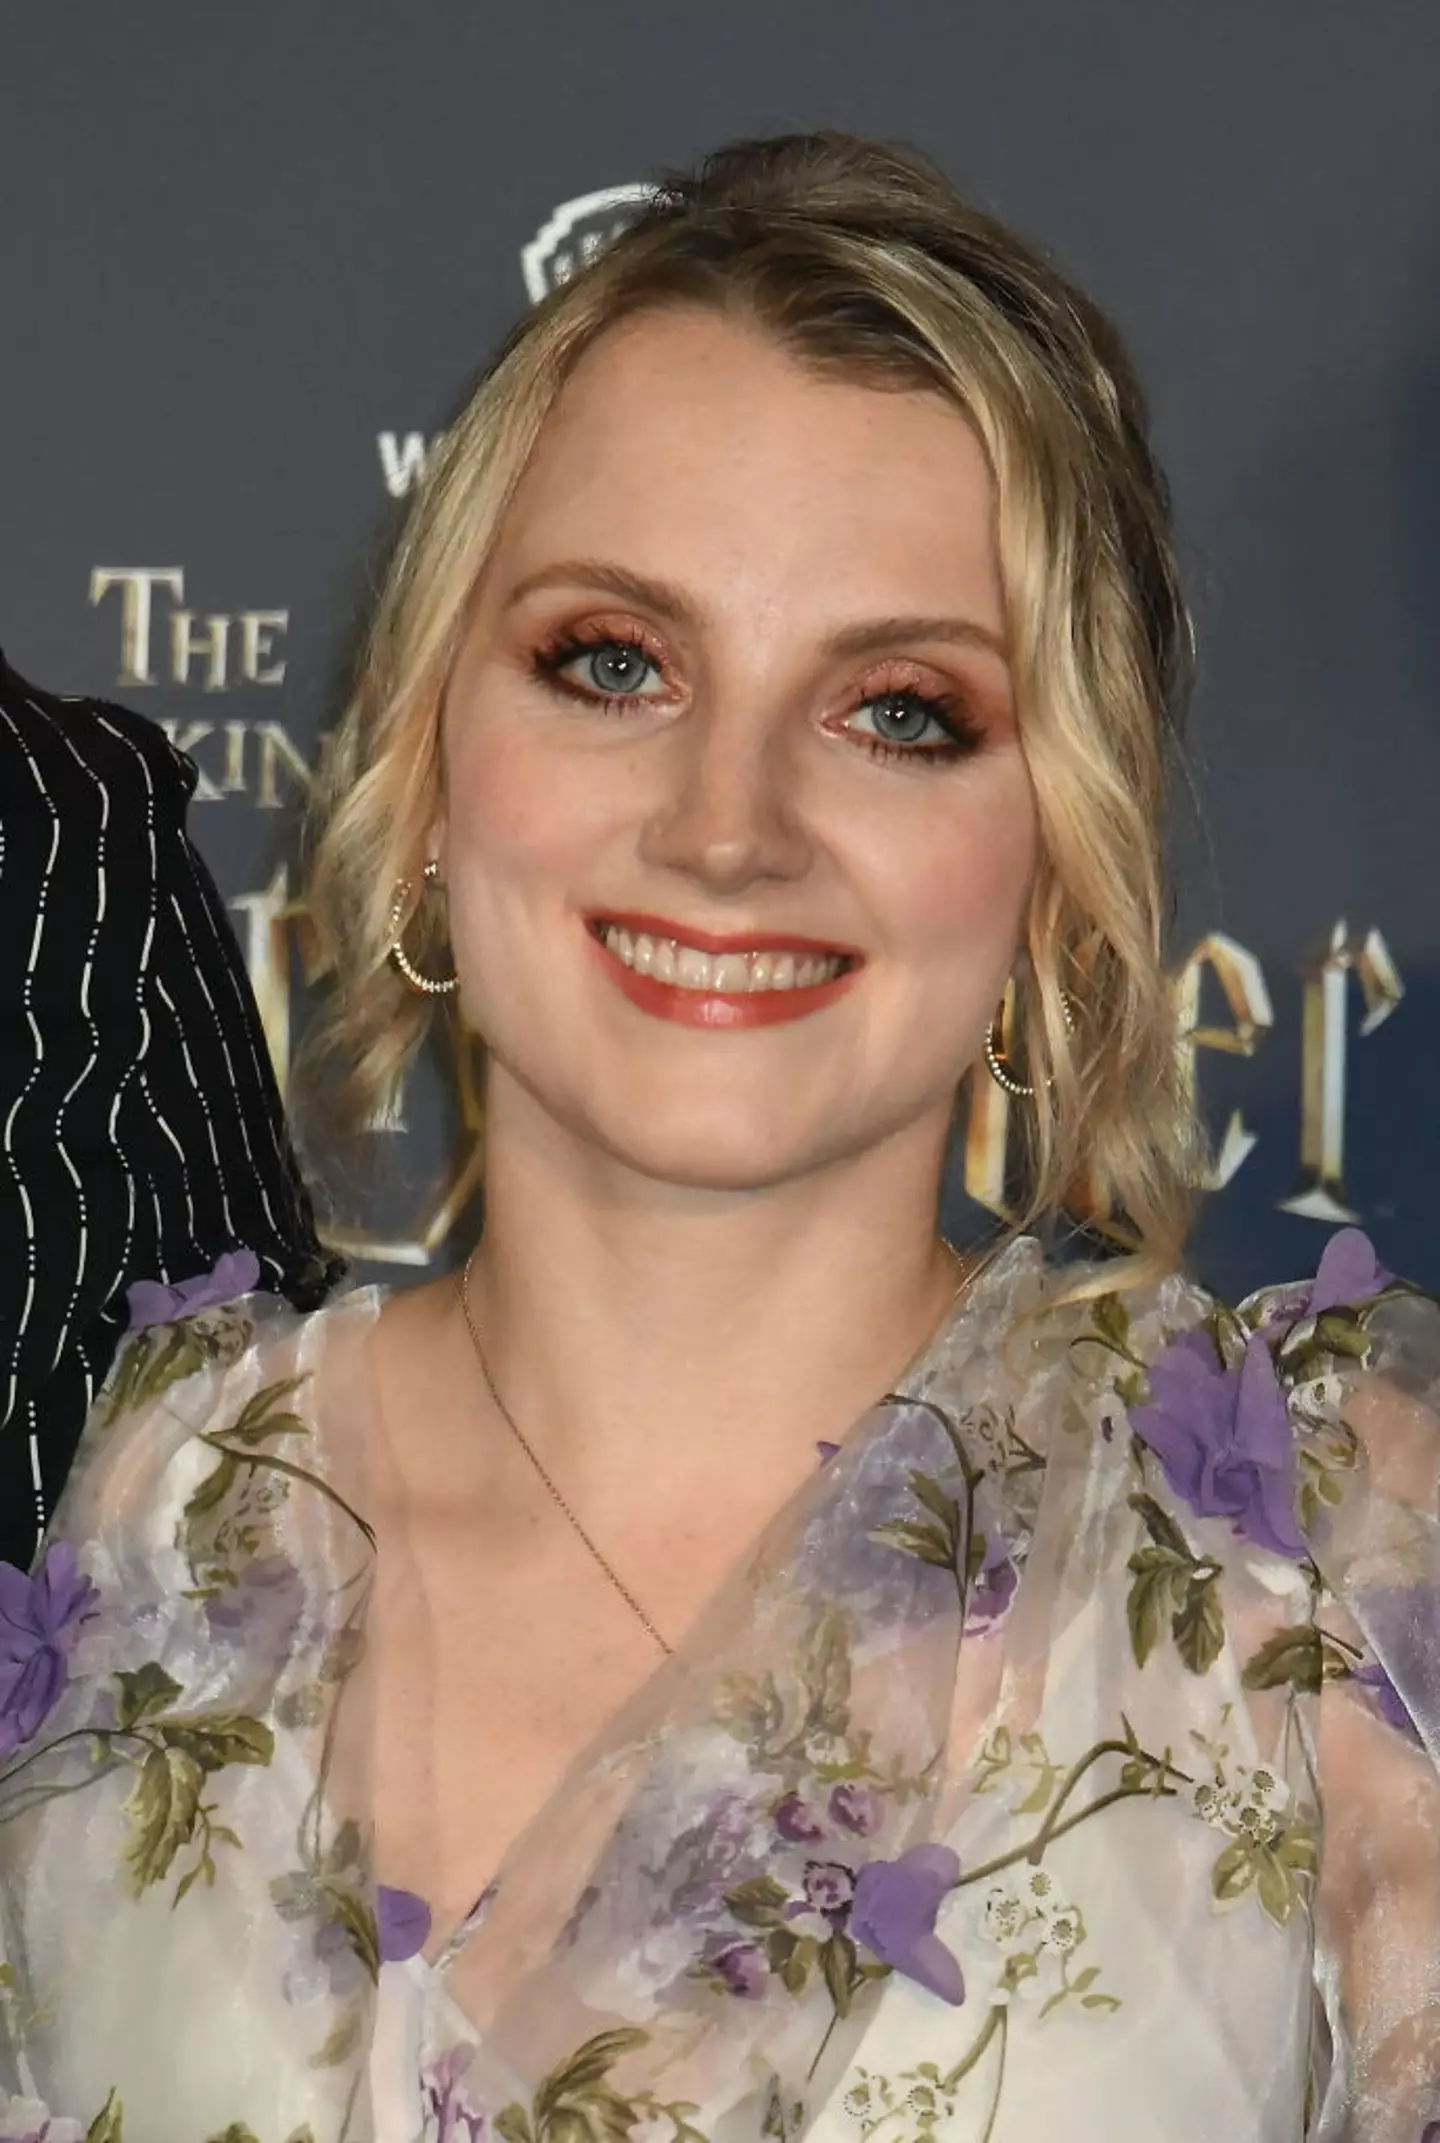 Evanna Lynch said she hoped people would give 'more grace' to Rowling. (Jun Sato/WireImage)